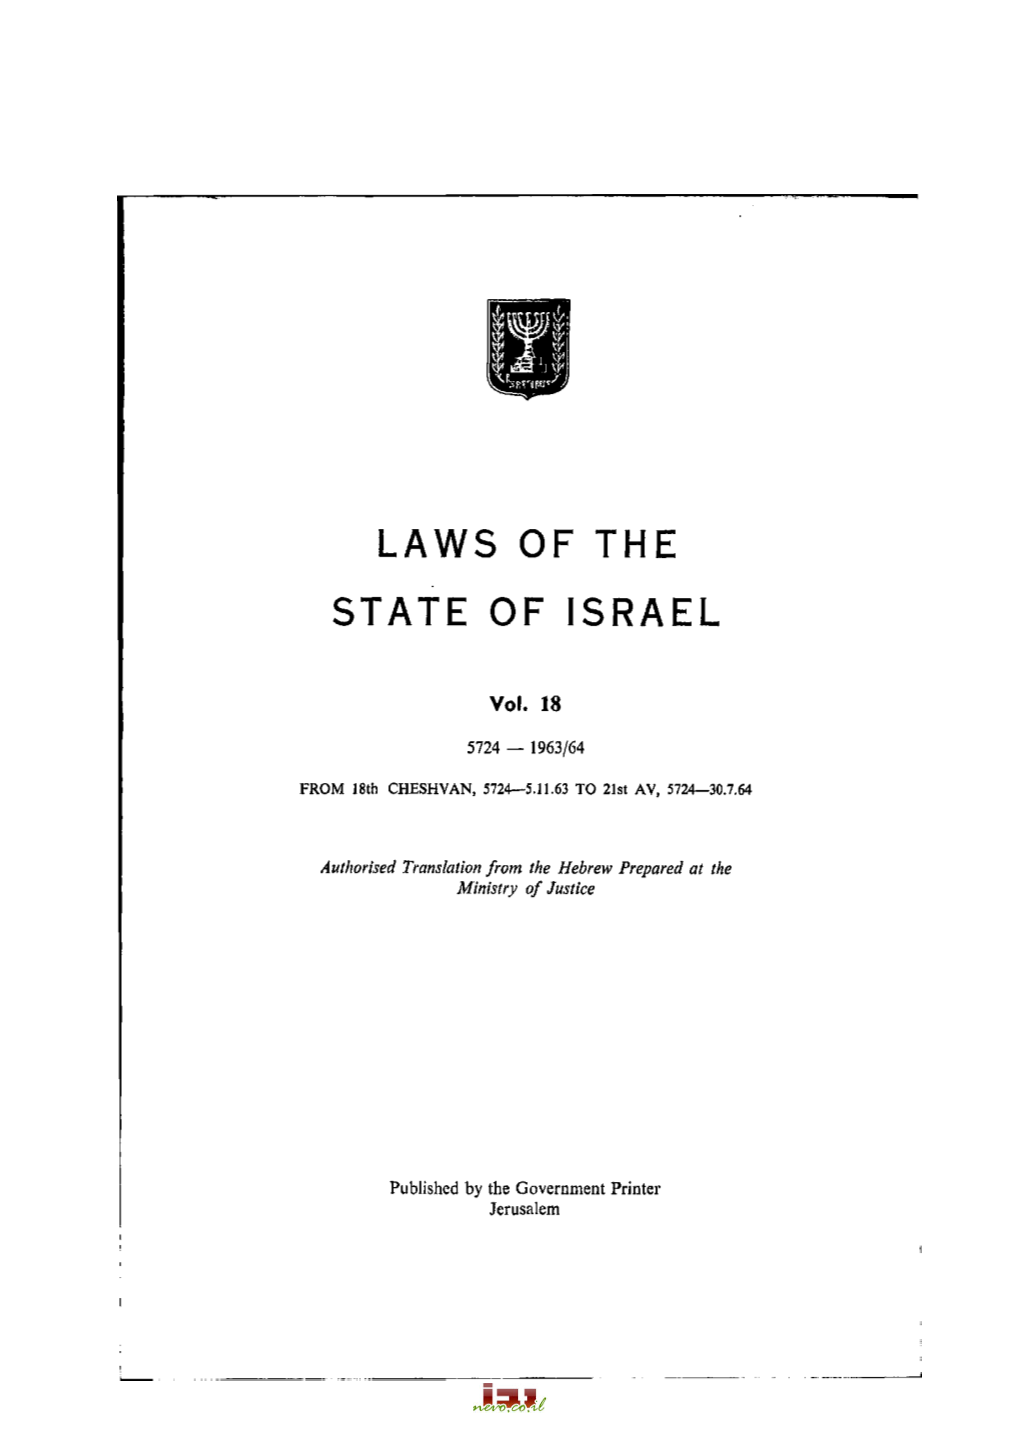 Laws of the State of Israel